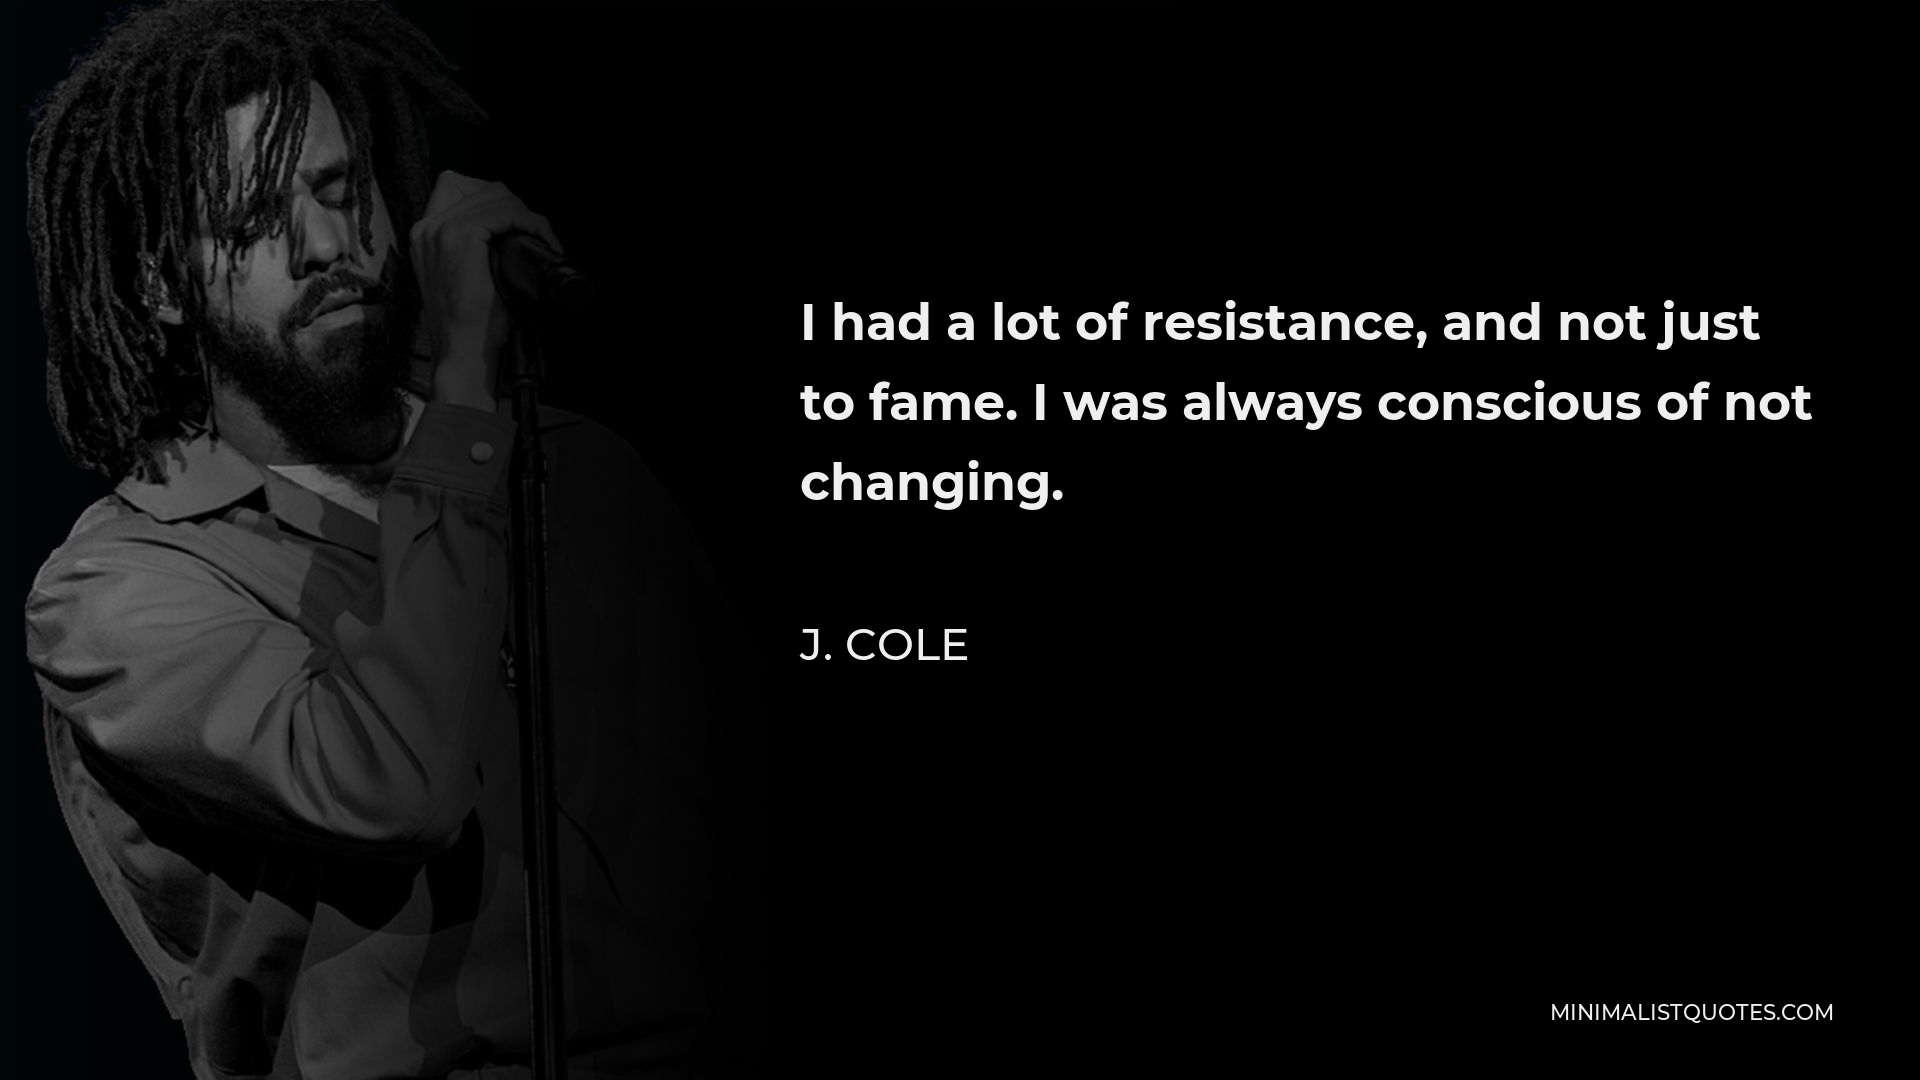 J. Cole Quote - I had a lot of resistance, and not just to fame. I was always conscious of not changing.